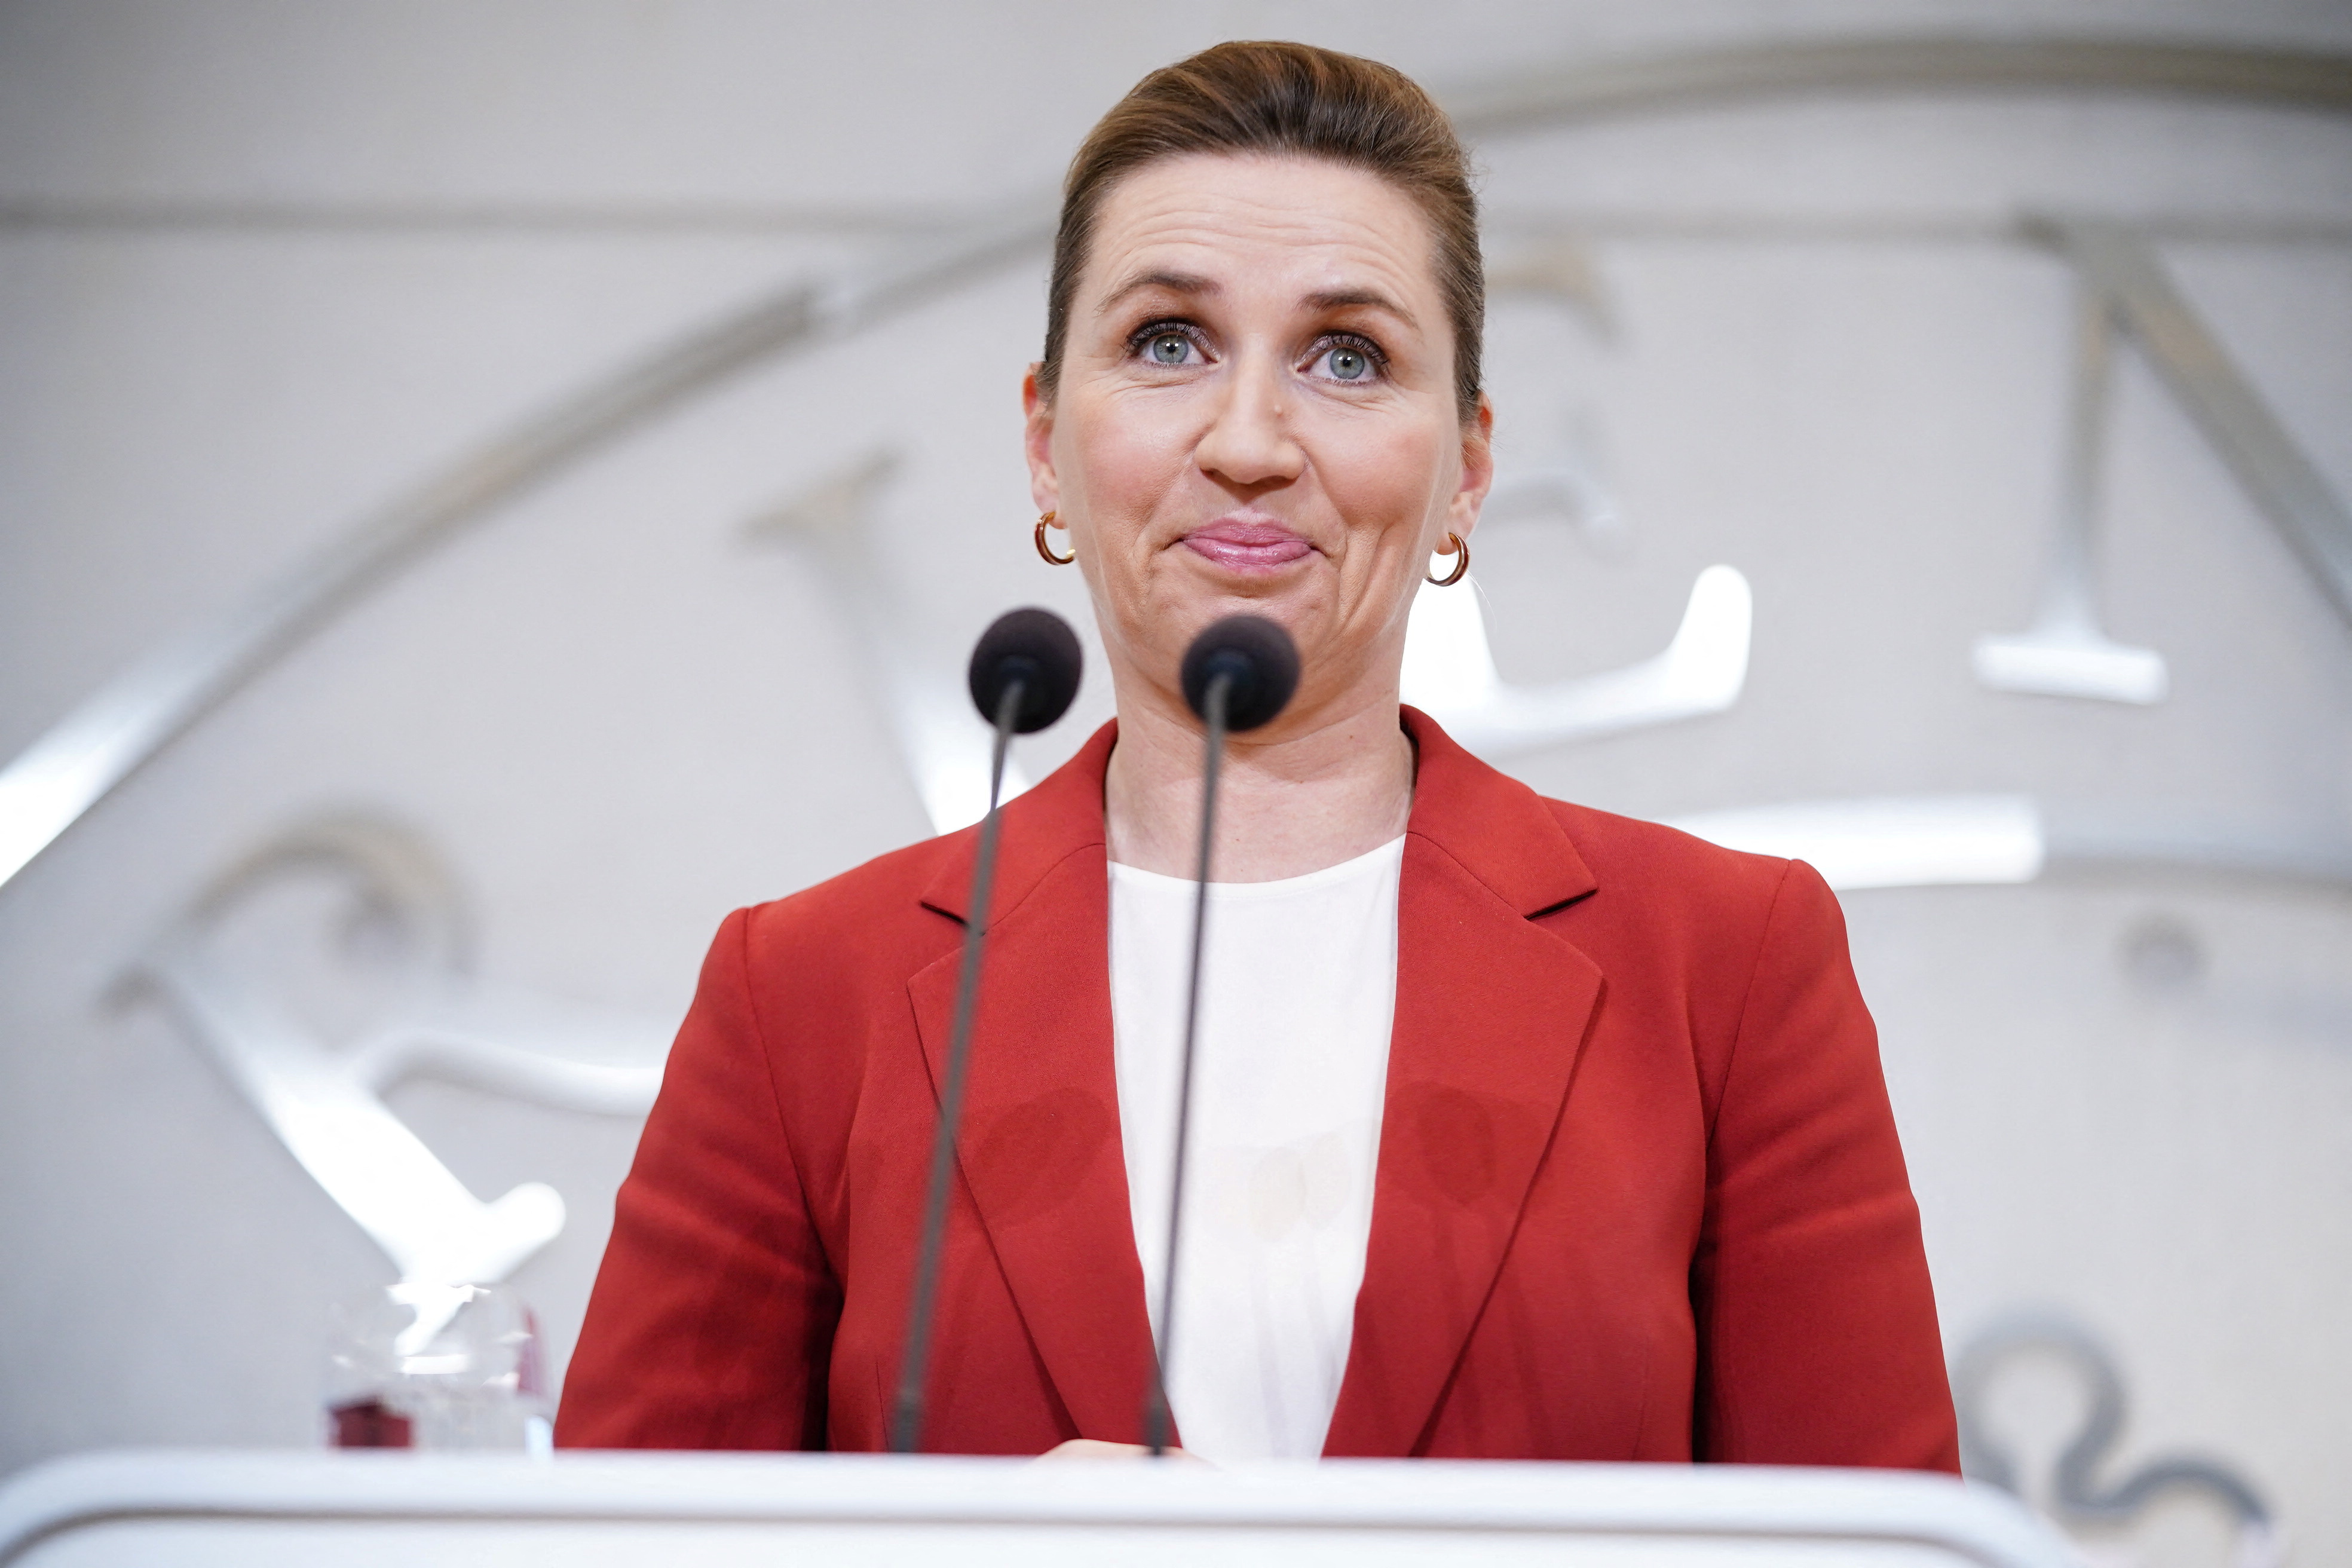 Danish Social Democrats agree new government with right-wing opposition